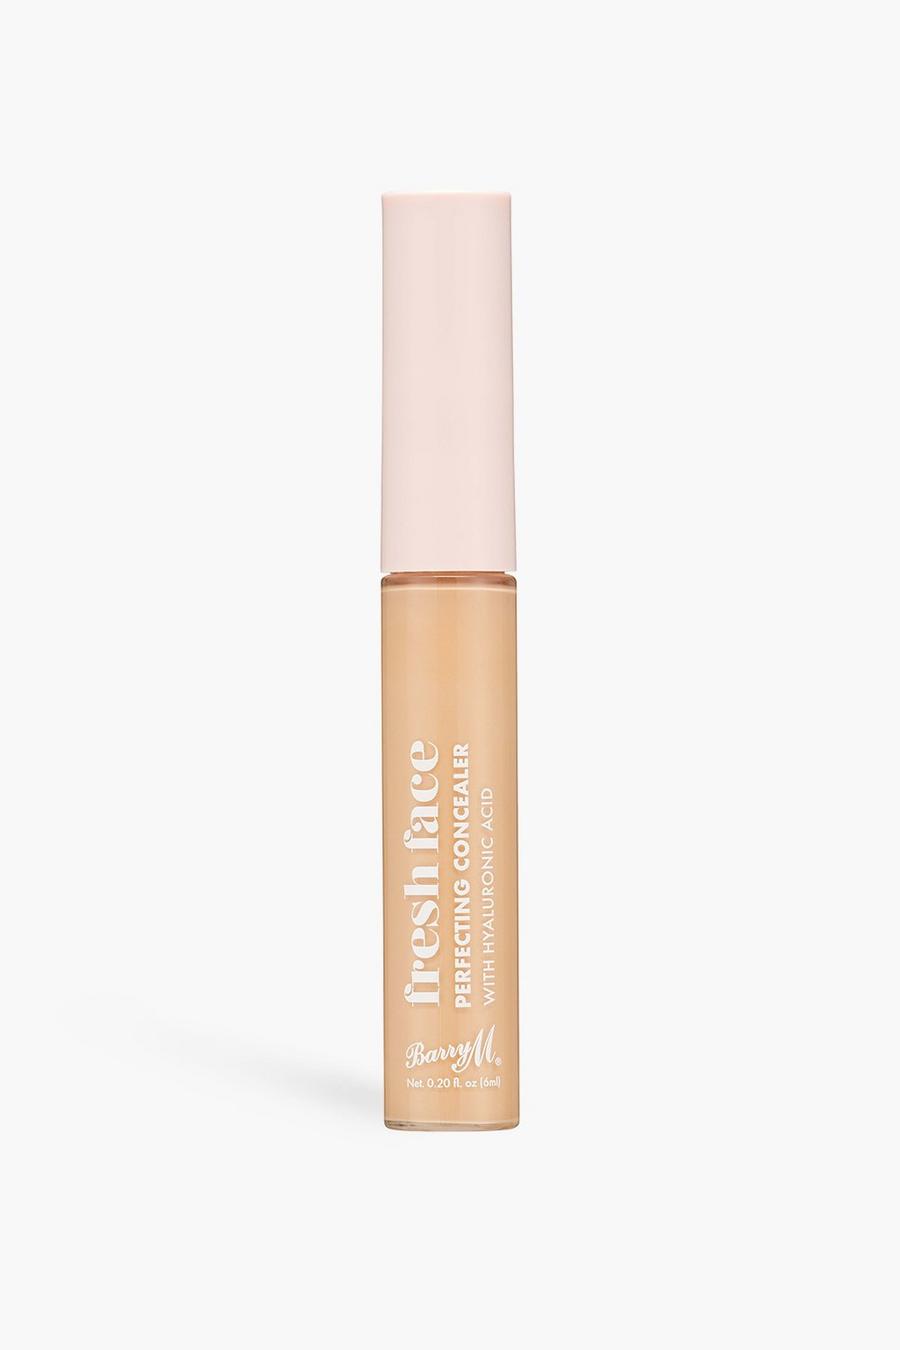 Tan brown Barry M Fresh Face Perfecting Concealer 4